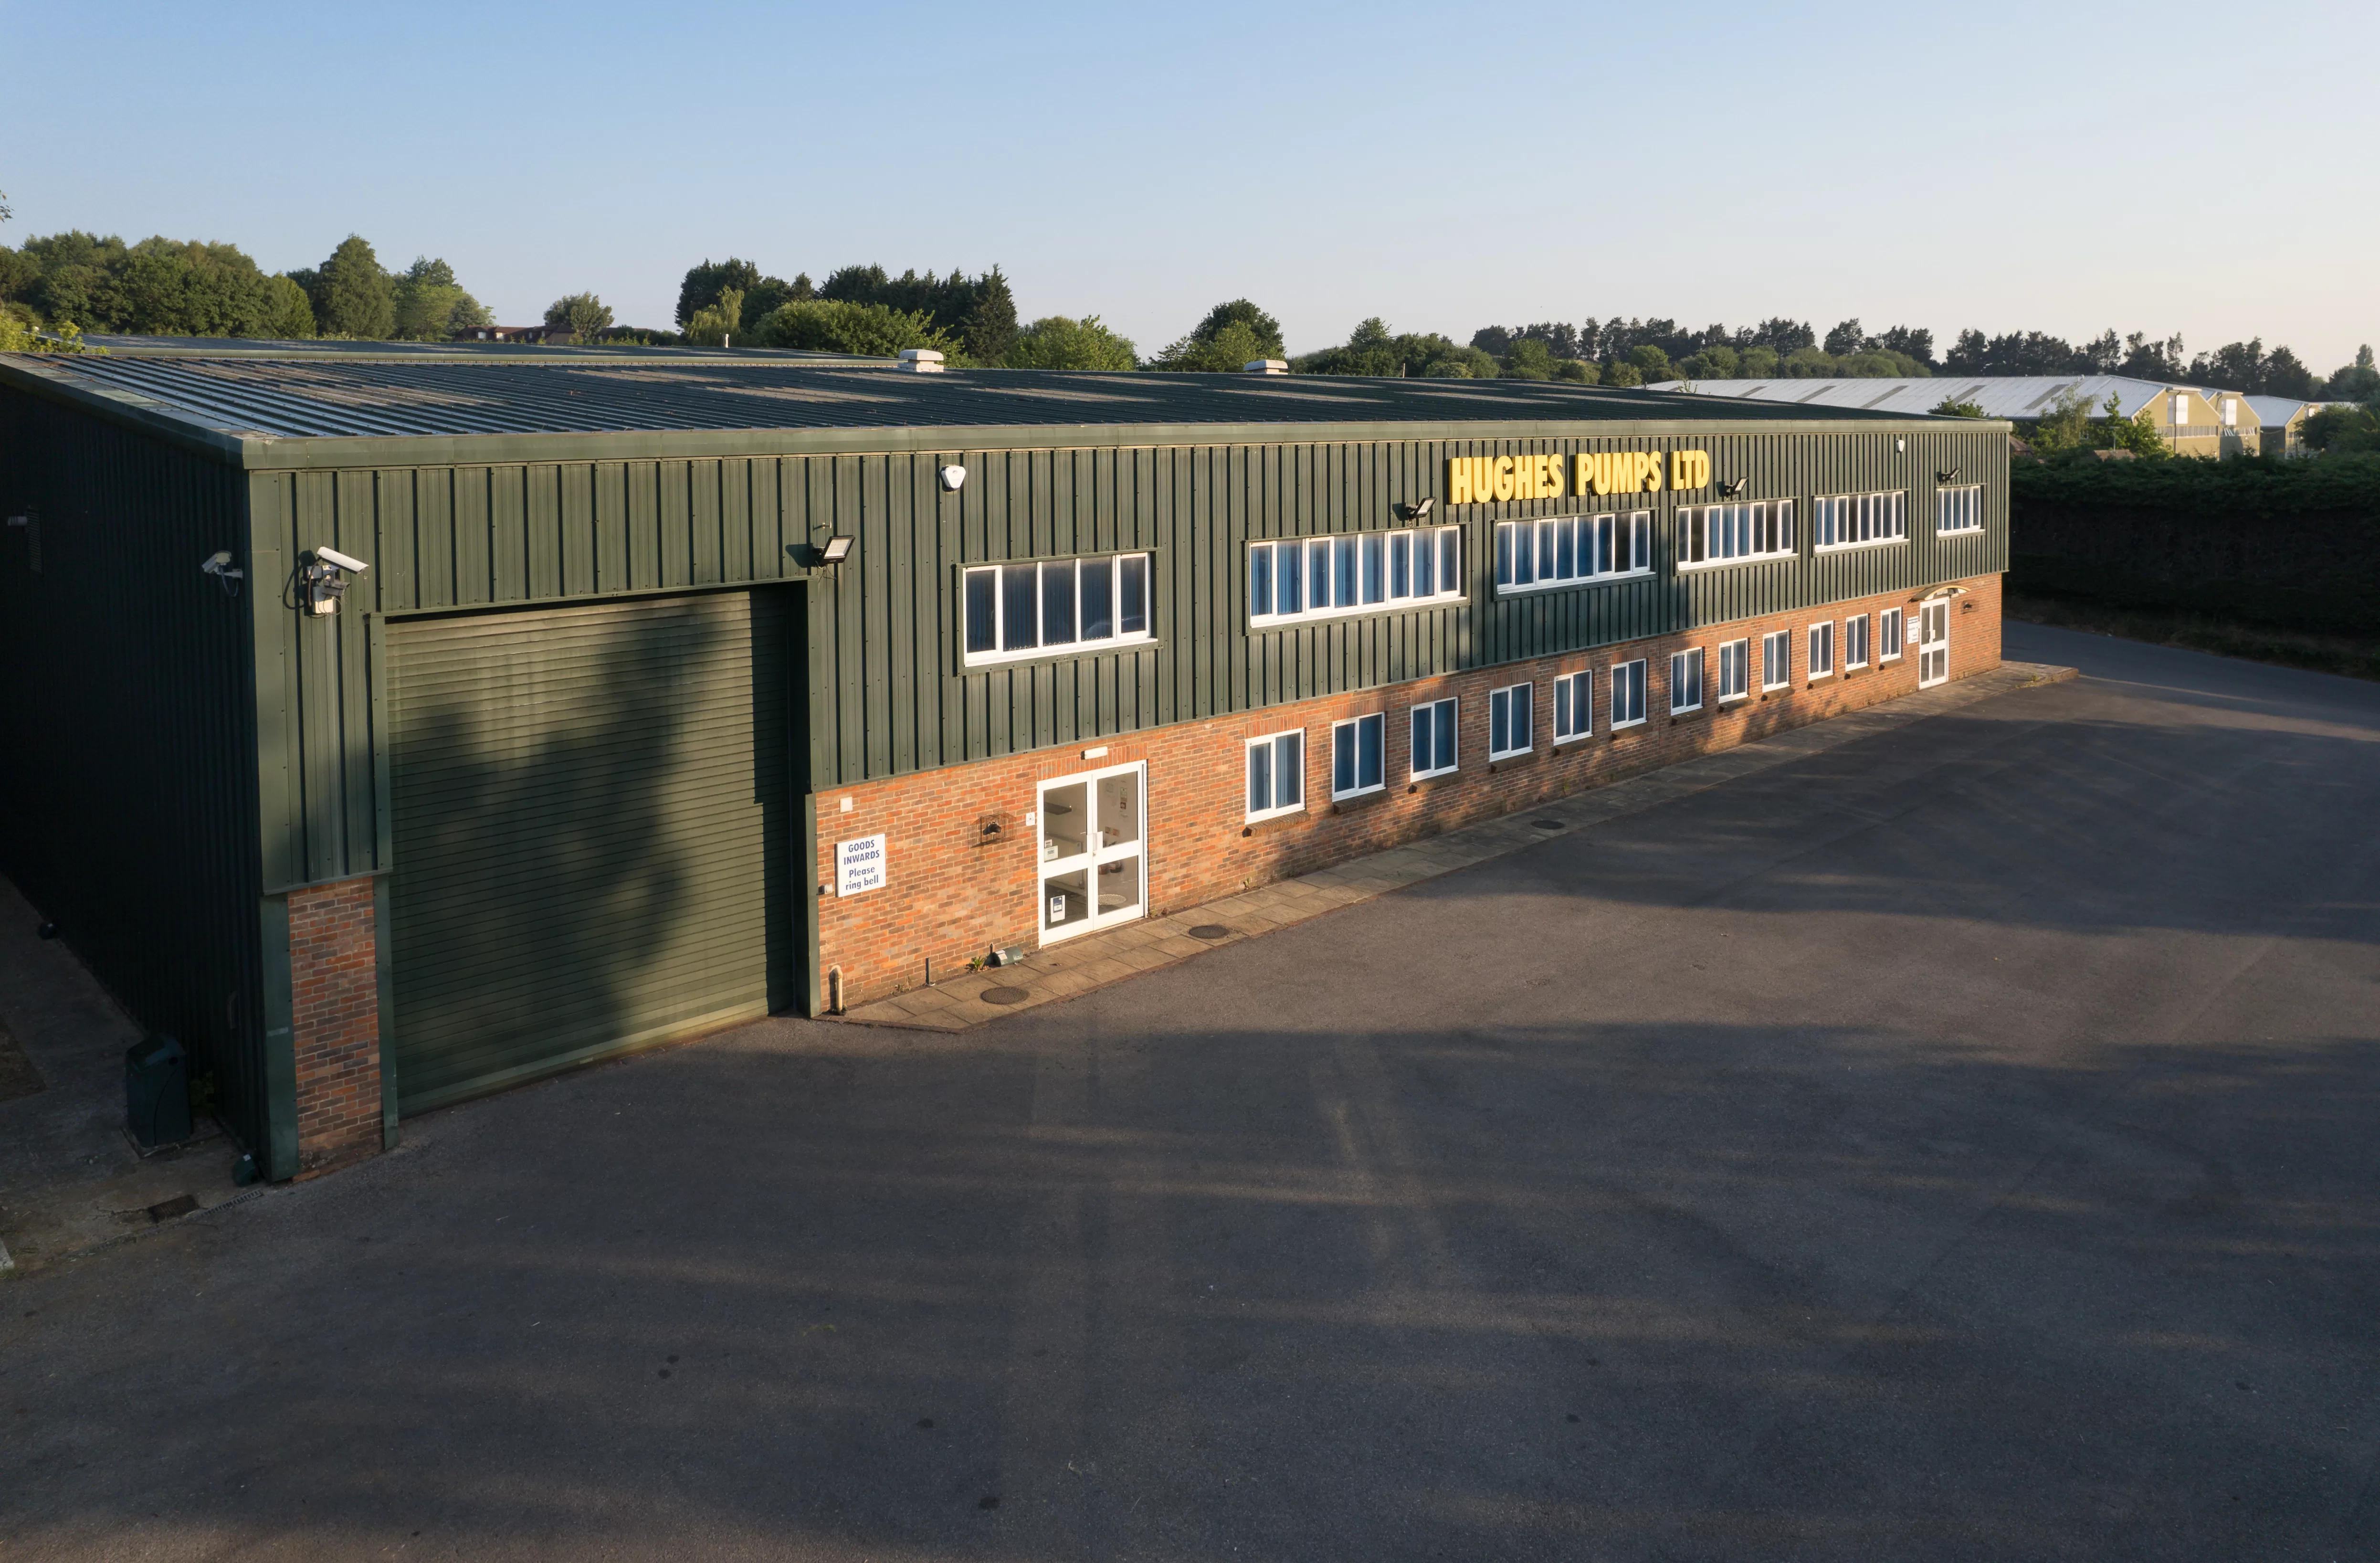 exterior shot of the hughes pumps factory in west sussex, UK